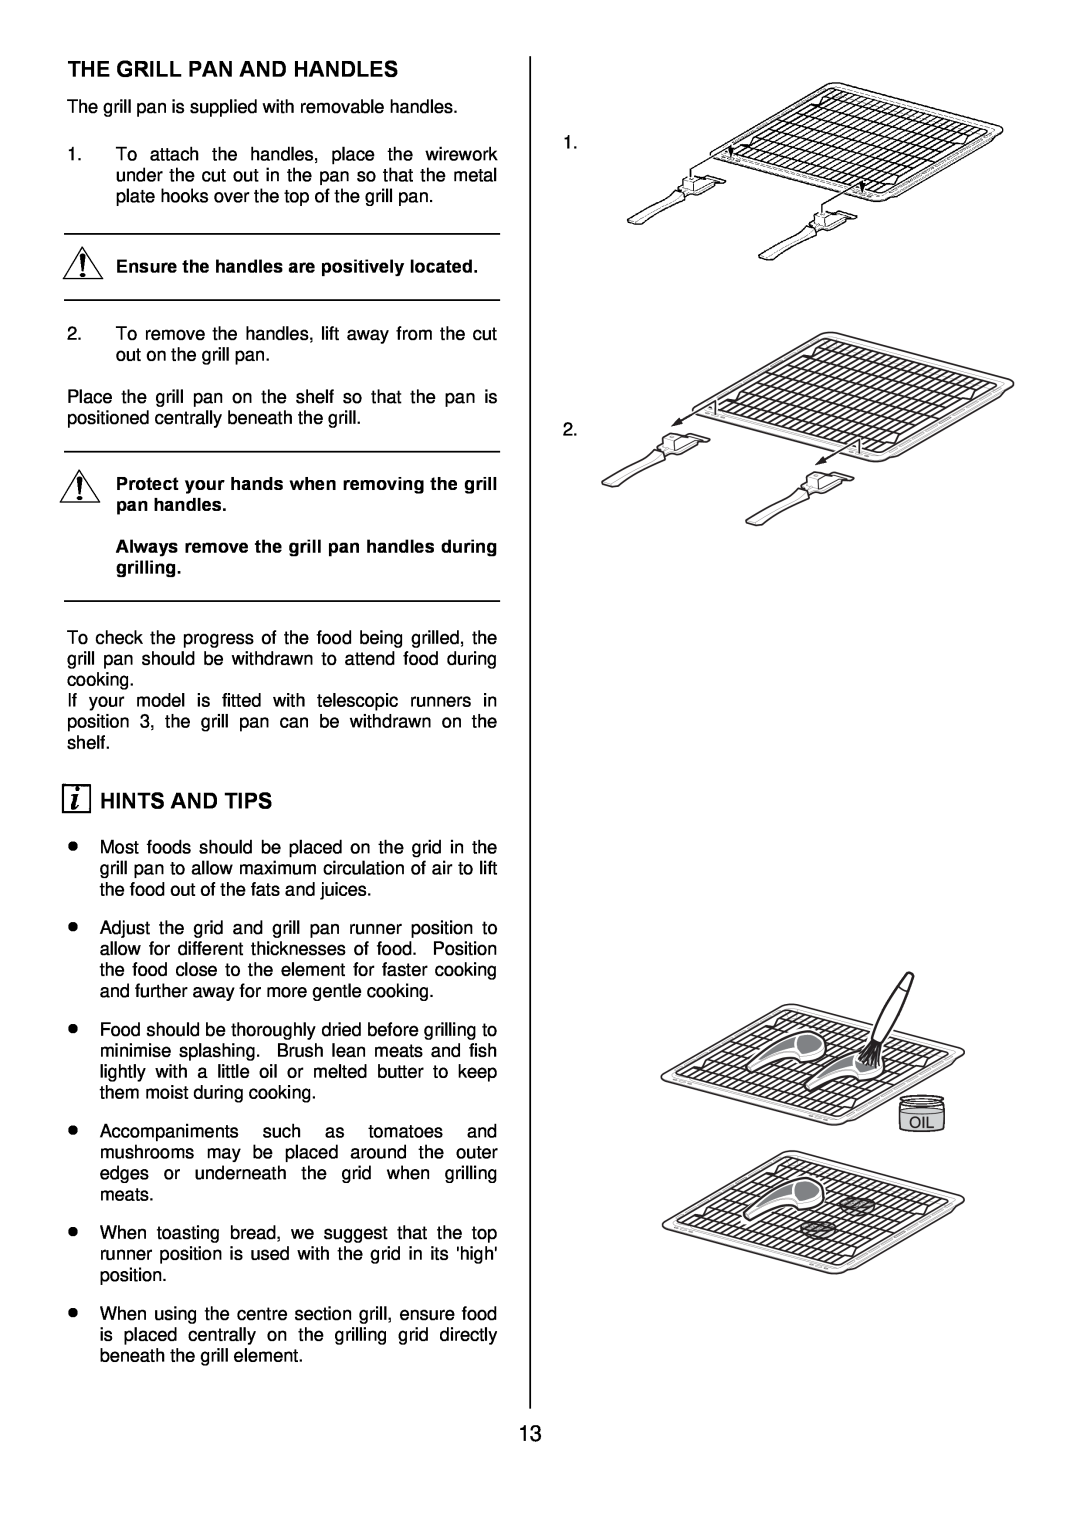 Zanussi ZDQ 995 manual The Grill Pan And Handles, Hints And Tips, Ensure the handles are positively located 